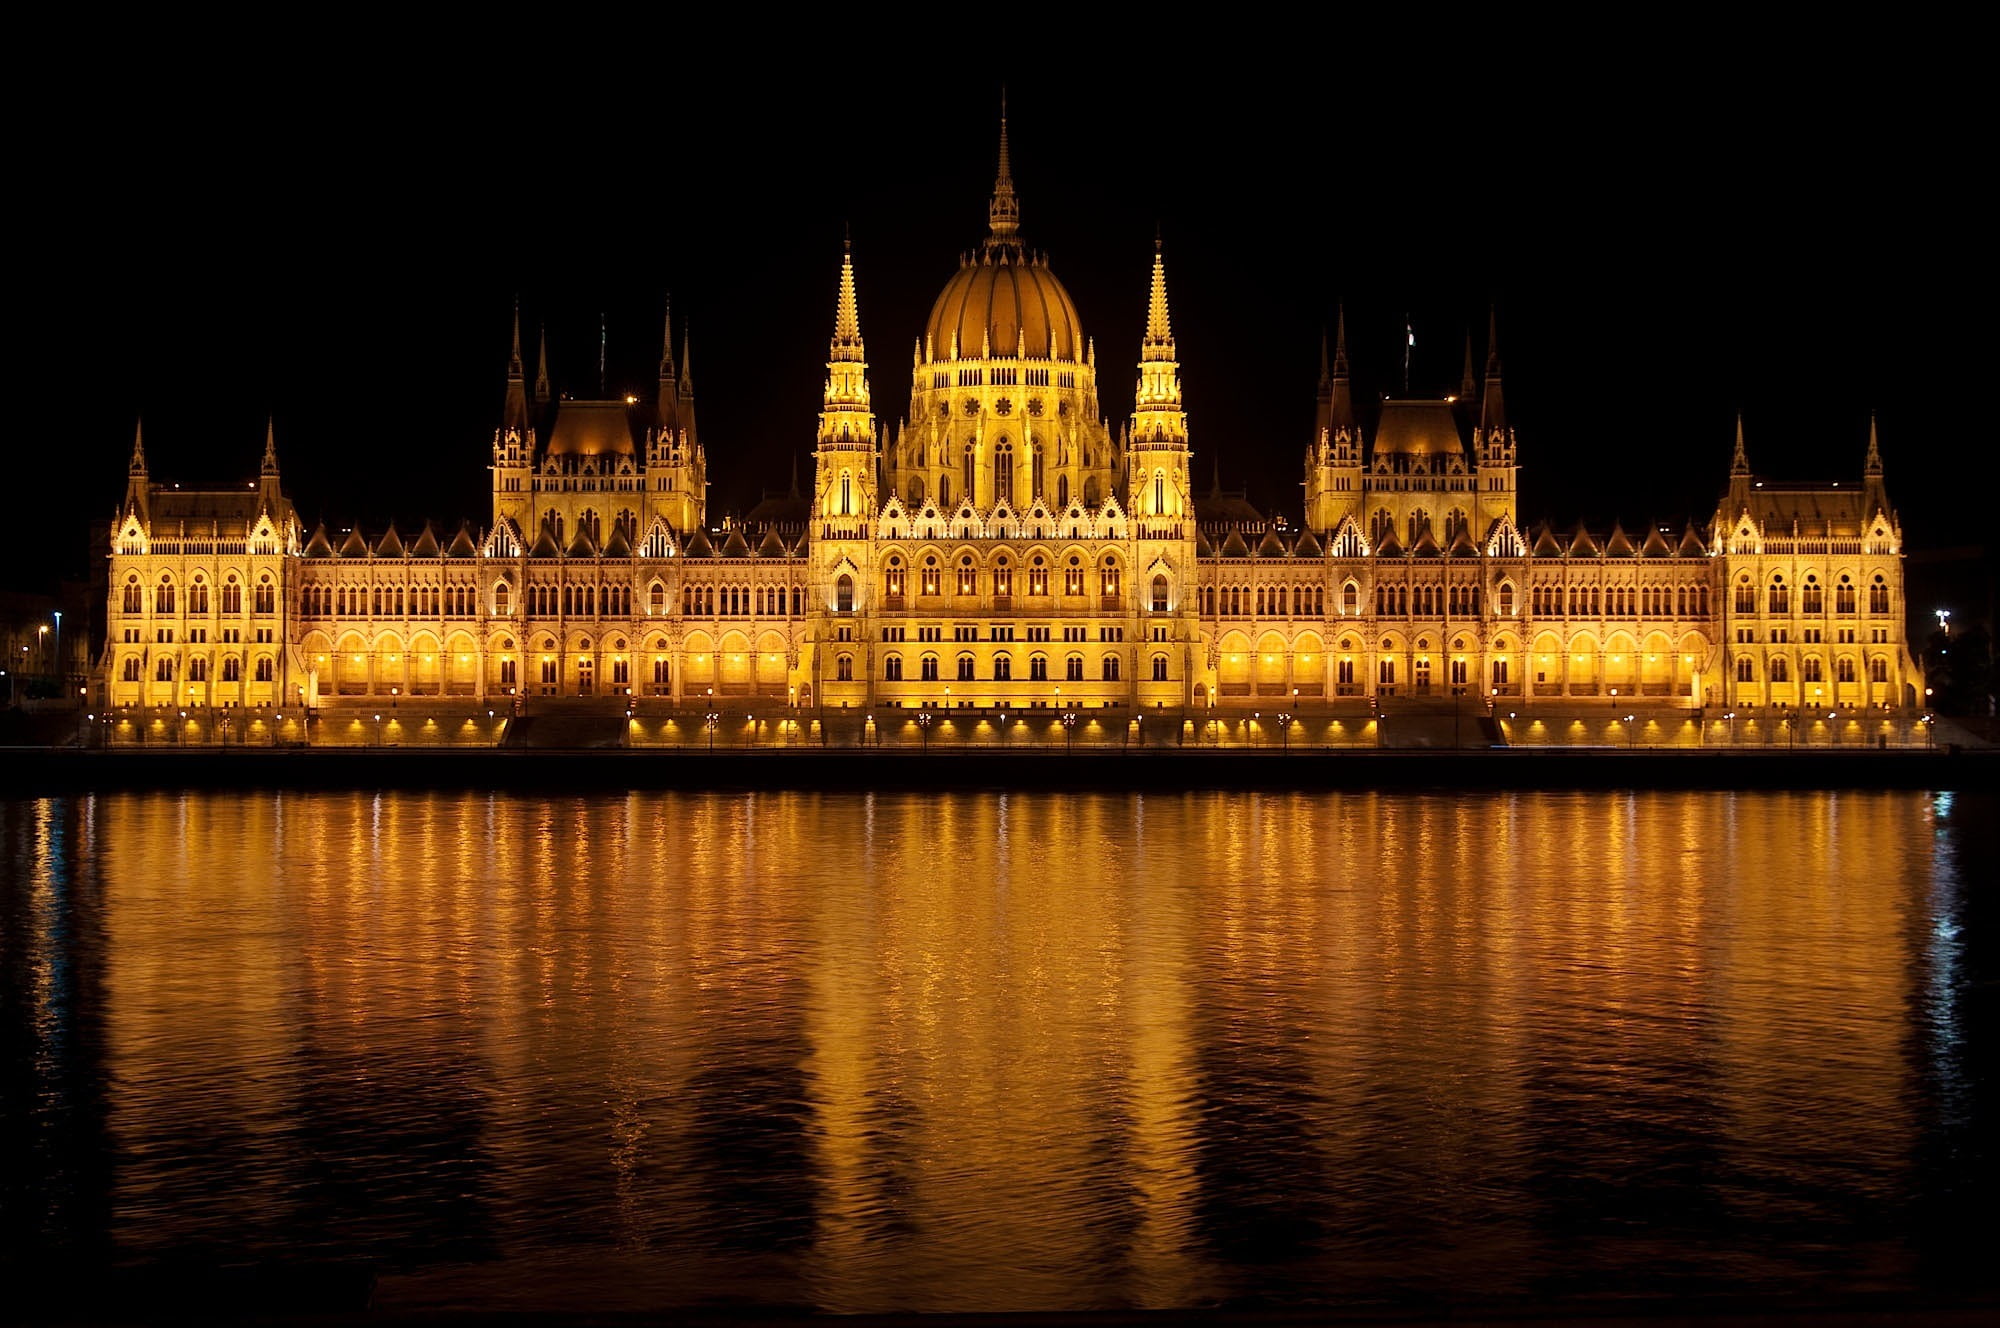 architecture, Budapest, building, danube river, hungarian parliament building